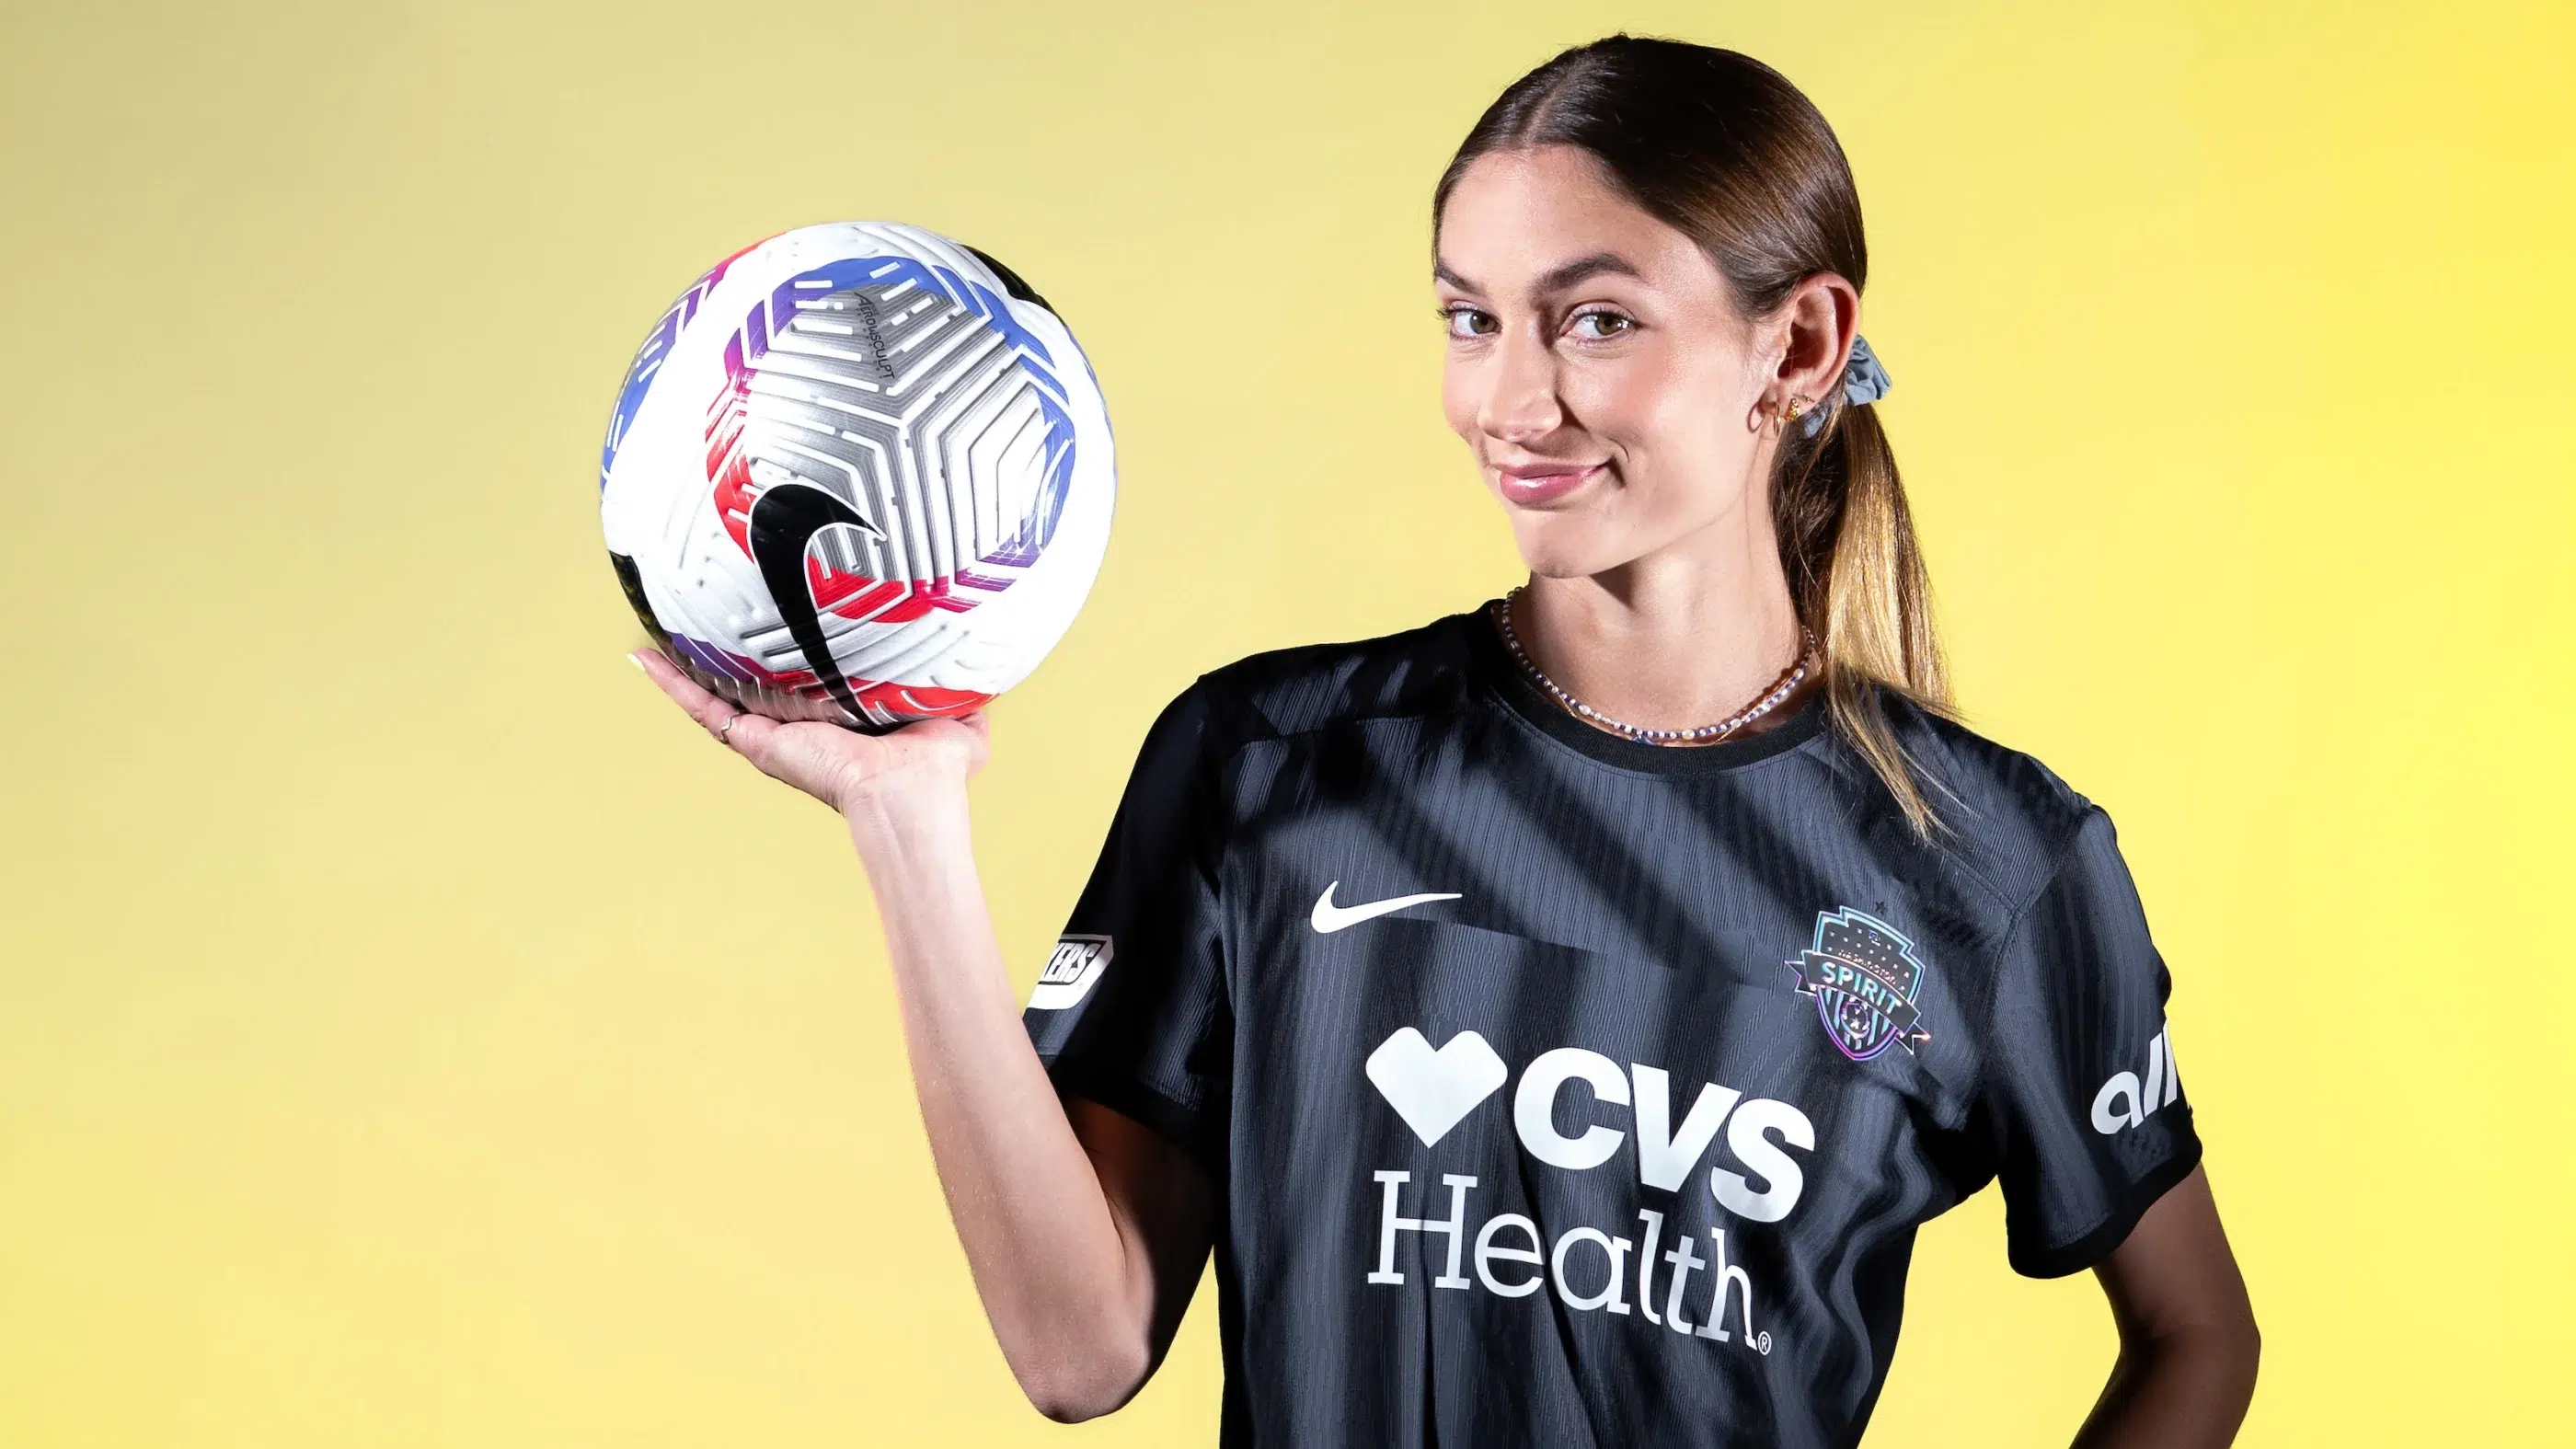 Paige Metayer in a black Spirit jersey holds up a soccer ball in front of a yellow background.